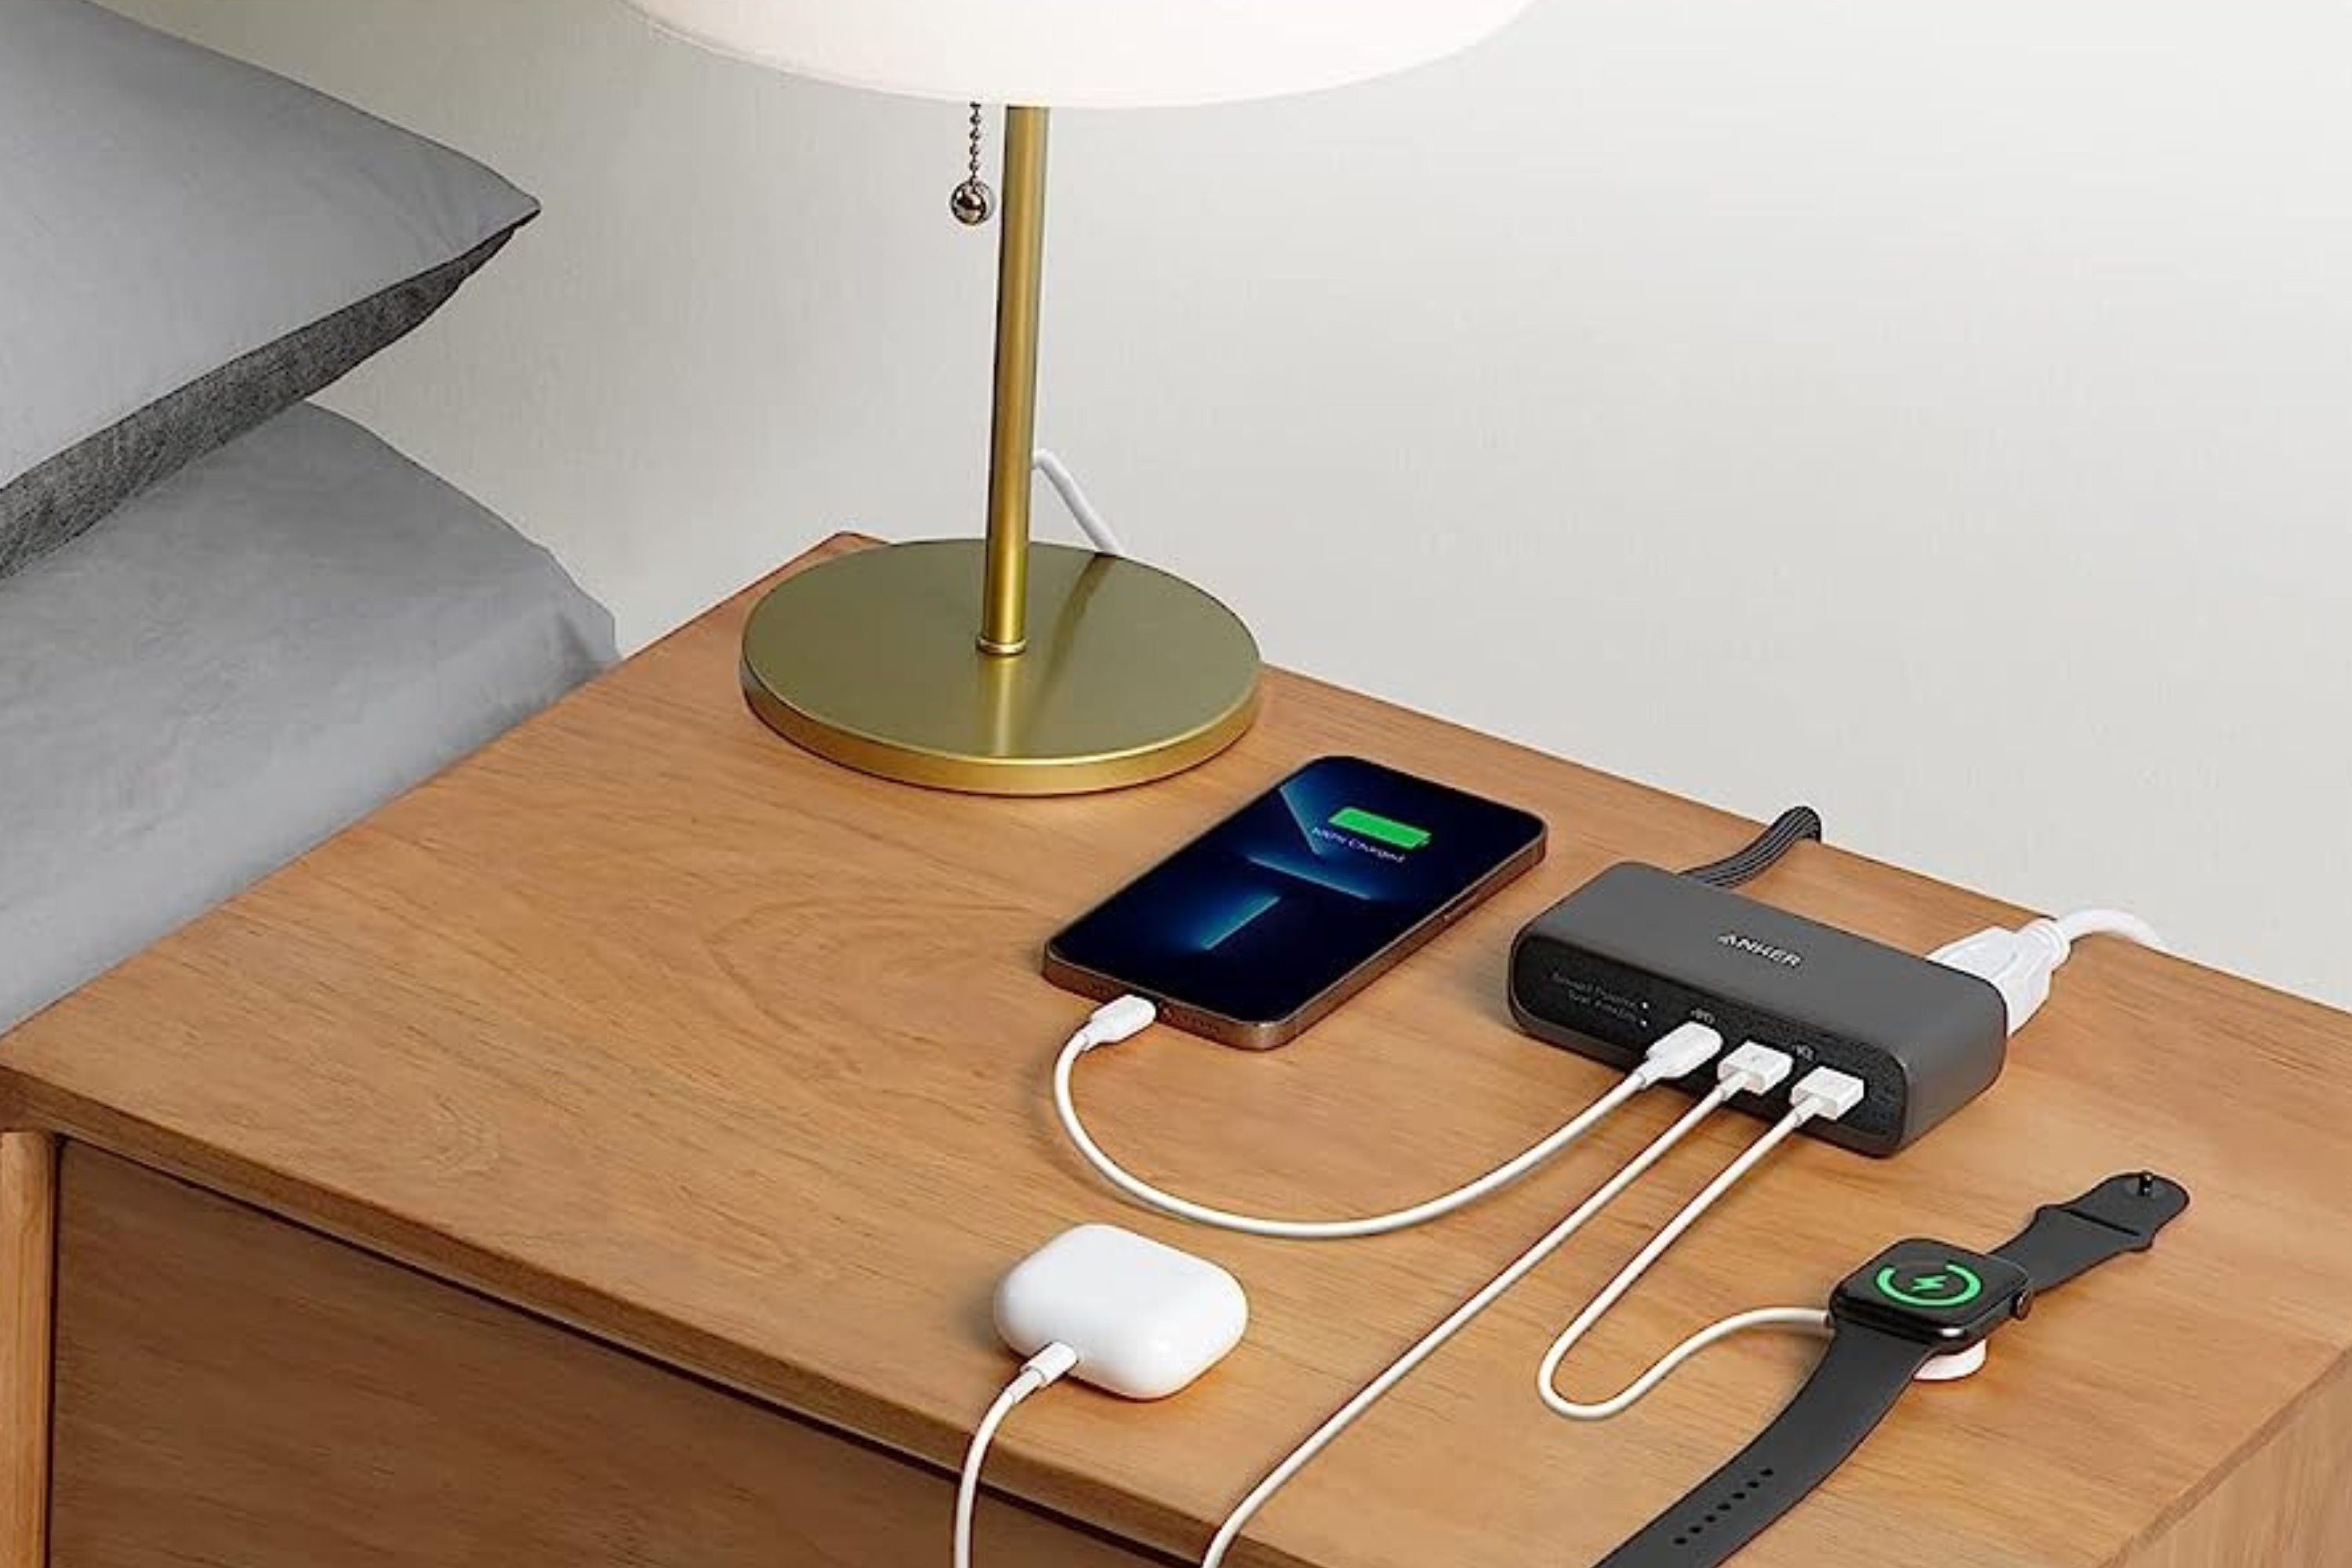 Anker 521 Charging Station with iPhone, Apple Watch, and AirPods plugged in